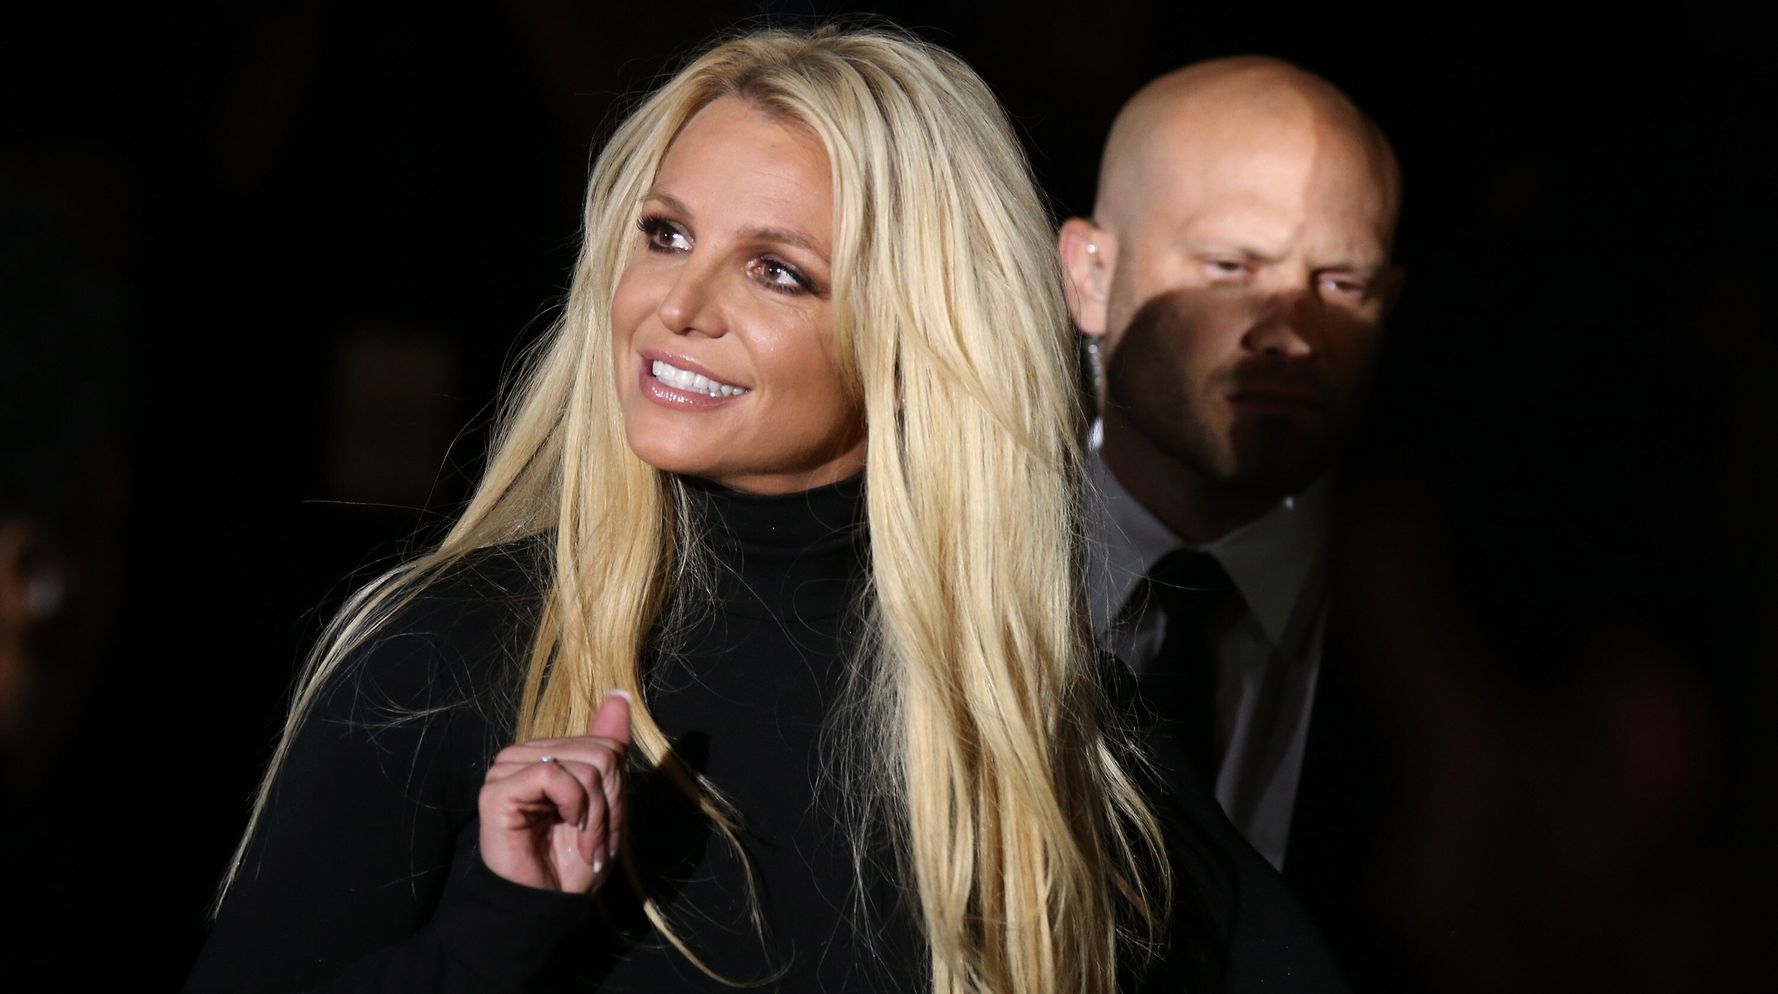 What's Next For Britney Spears's Conservatorship